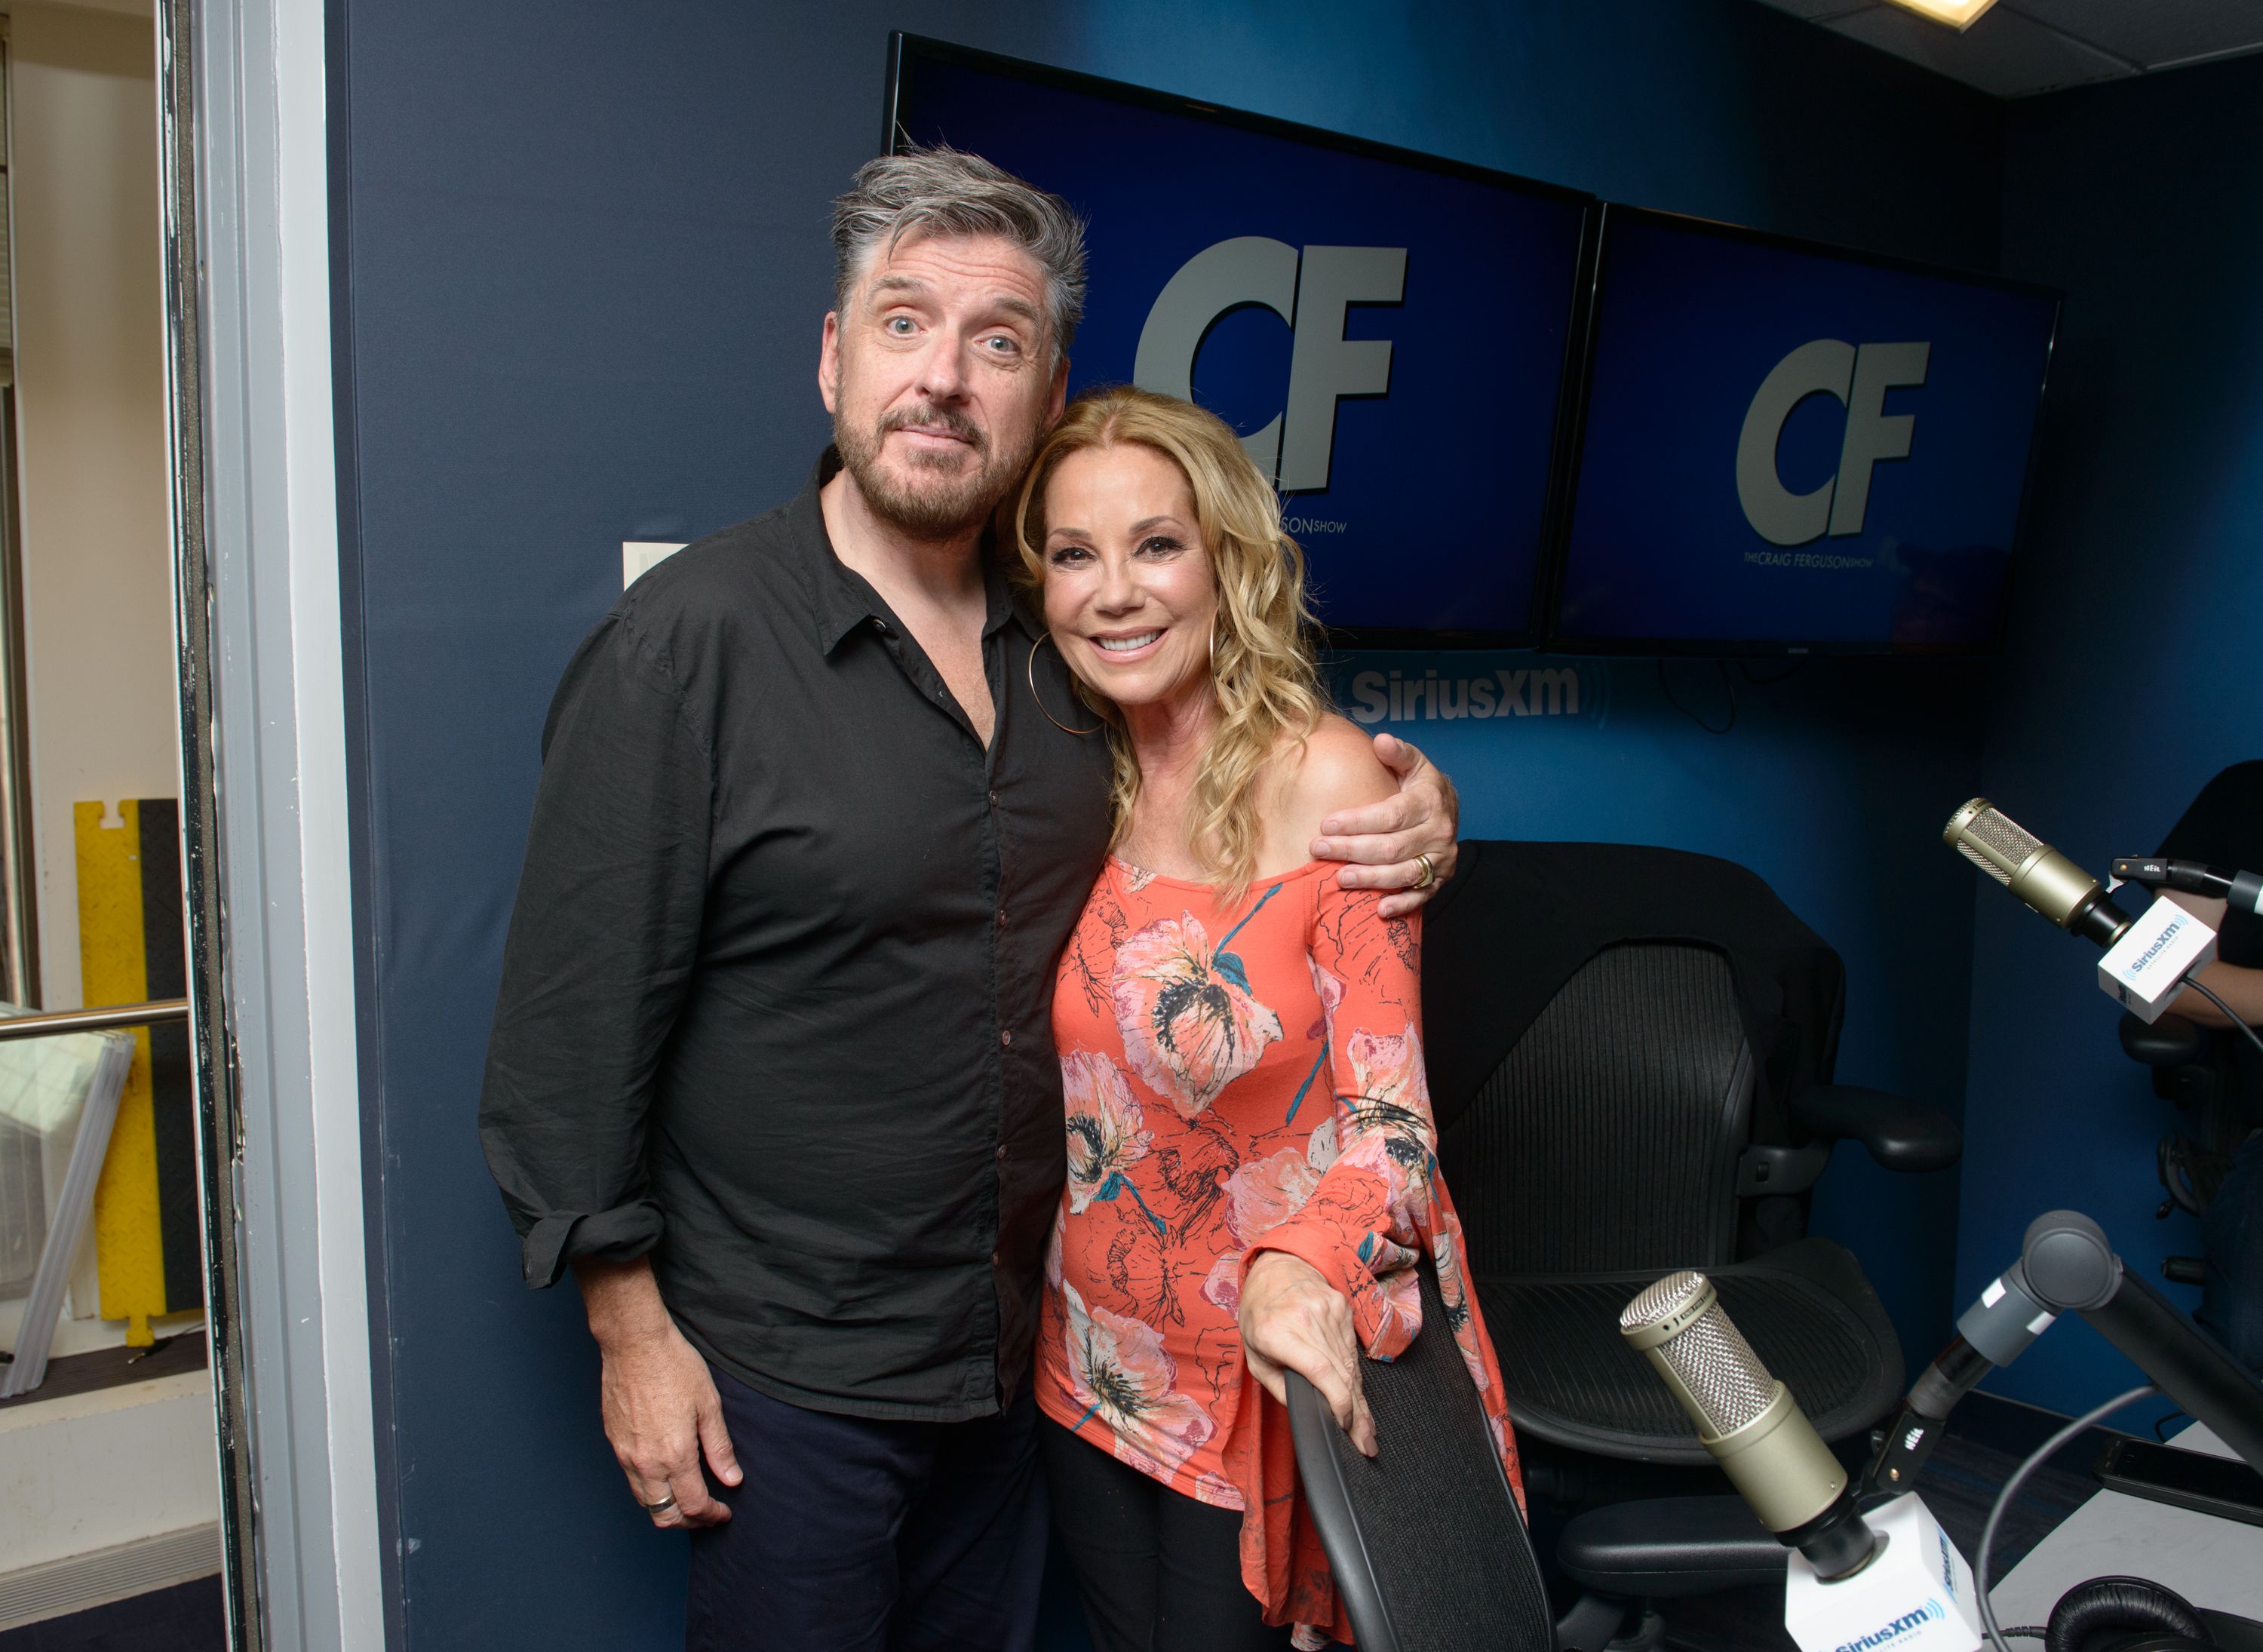  Craig Ferguson and Kathie Lee Gifford at 'The Craig Ferguson Show' in 2017 in New York | Source: Getty Images